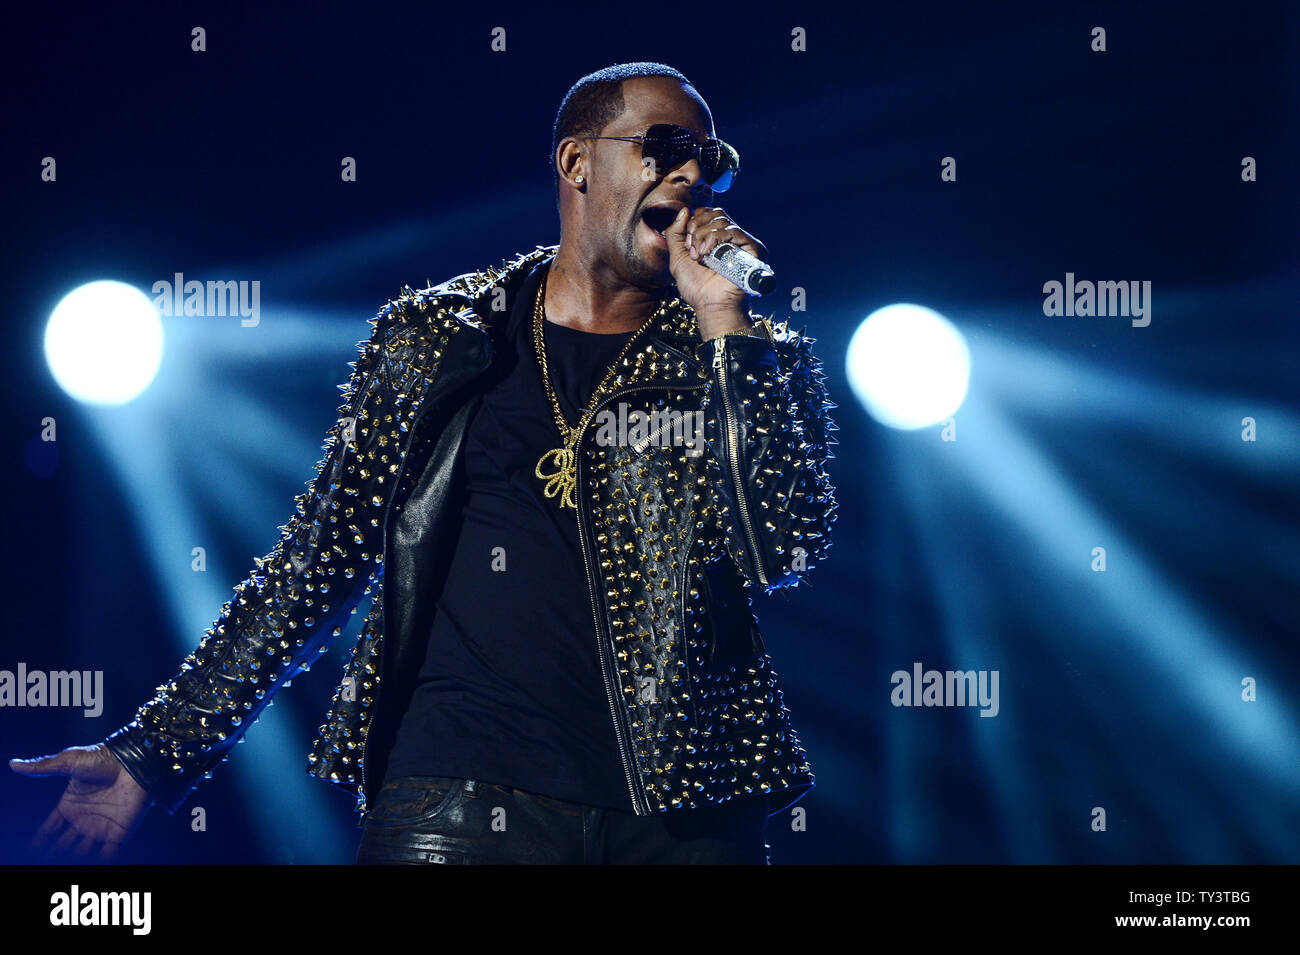 Singer R. Kelly performs on stage during BET Awards 13, at the Nokia